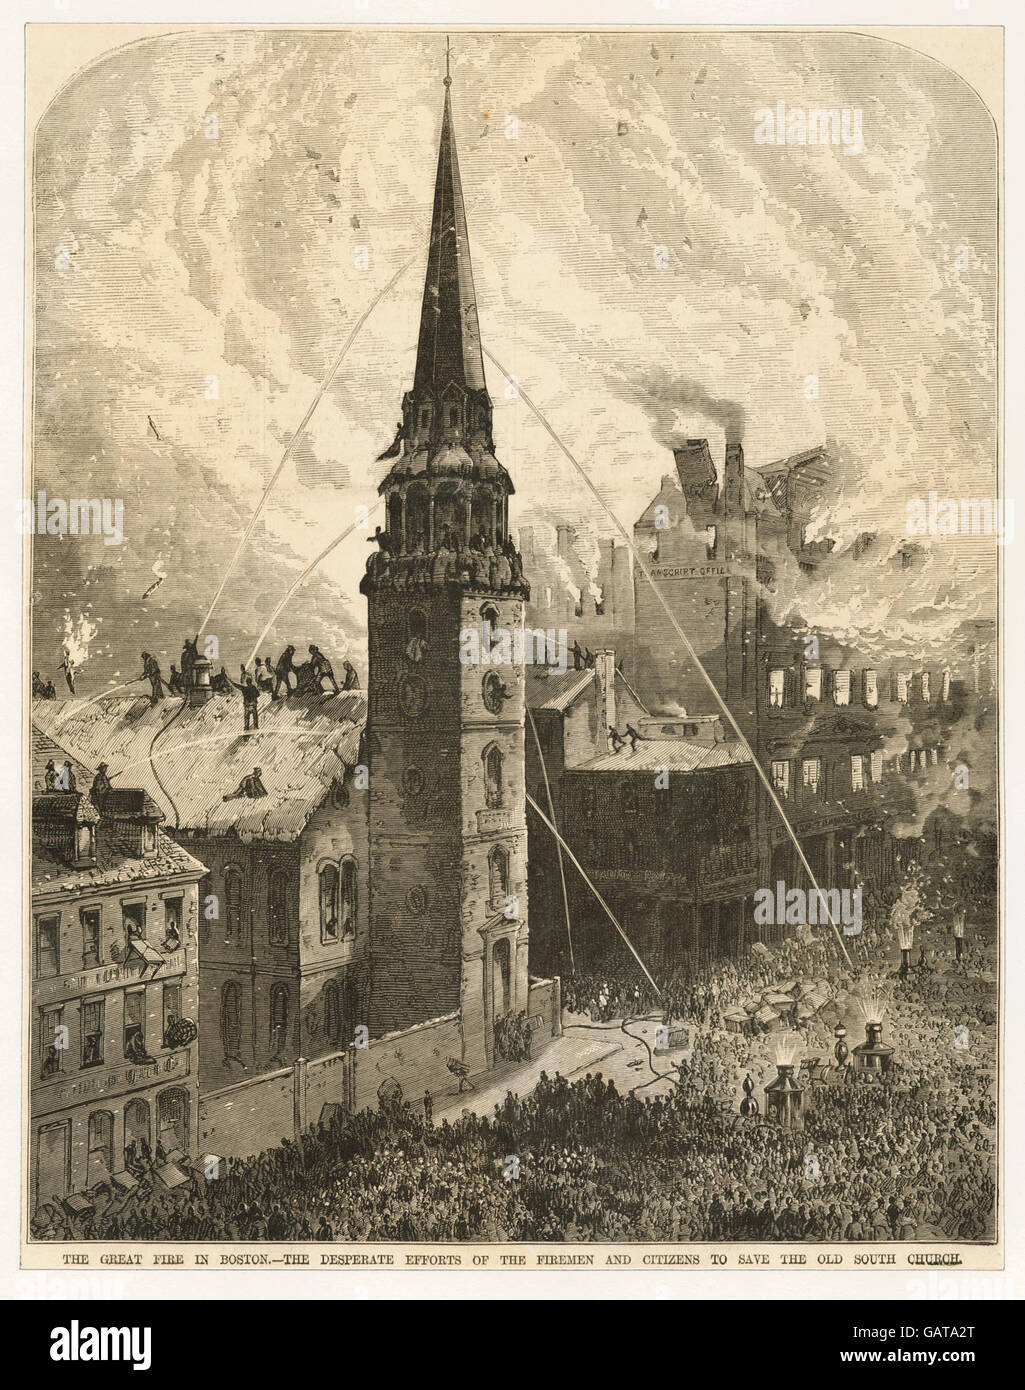 The great fire in Boston - the desperate attempts of the firemen and citizens to save the Old South Church ( Hades-250405-465384) Stock Photo